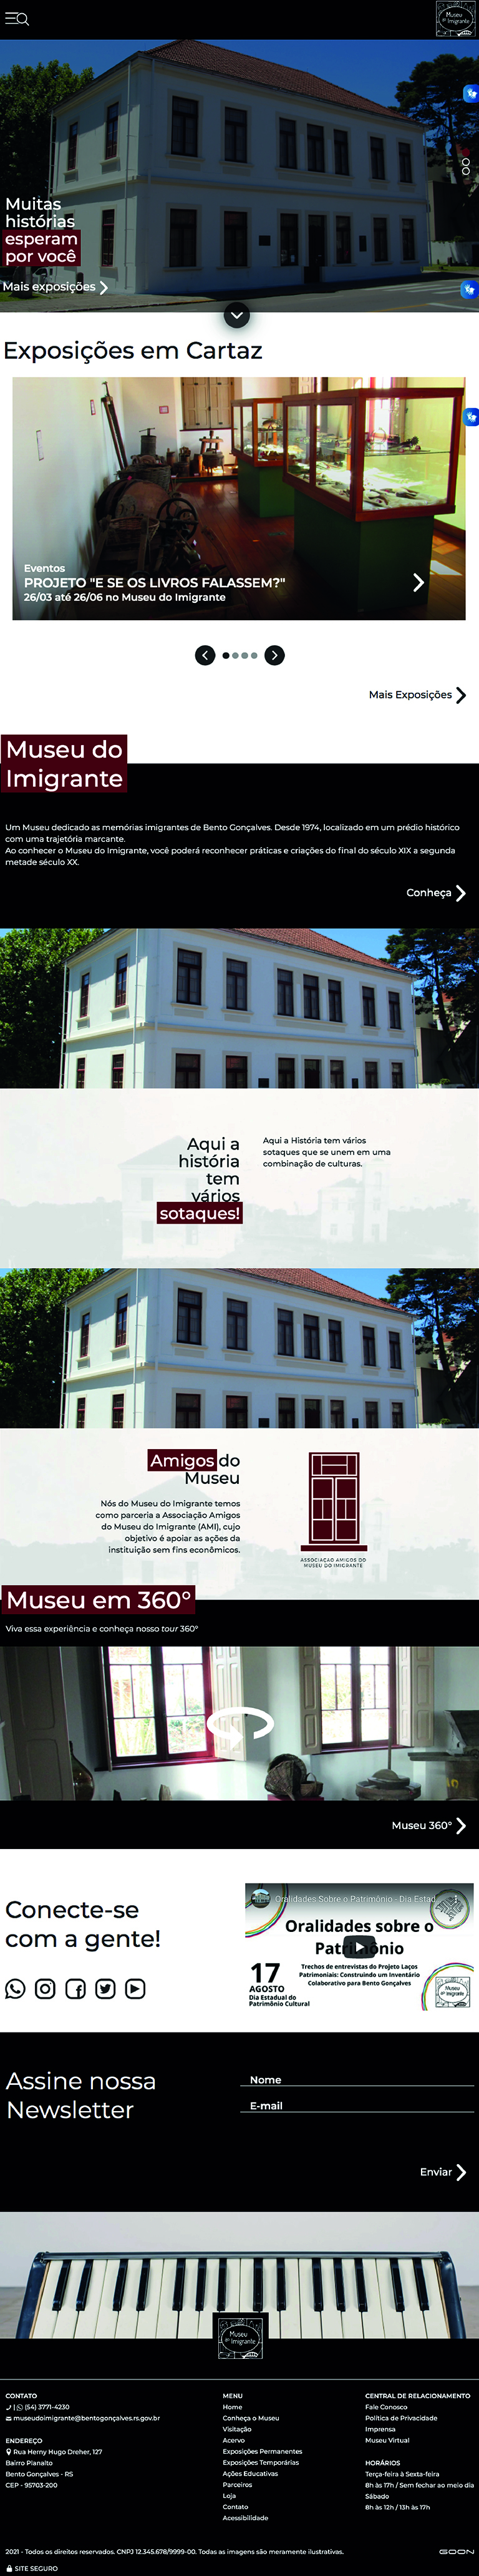 Museu do Imigrante layout tablet version